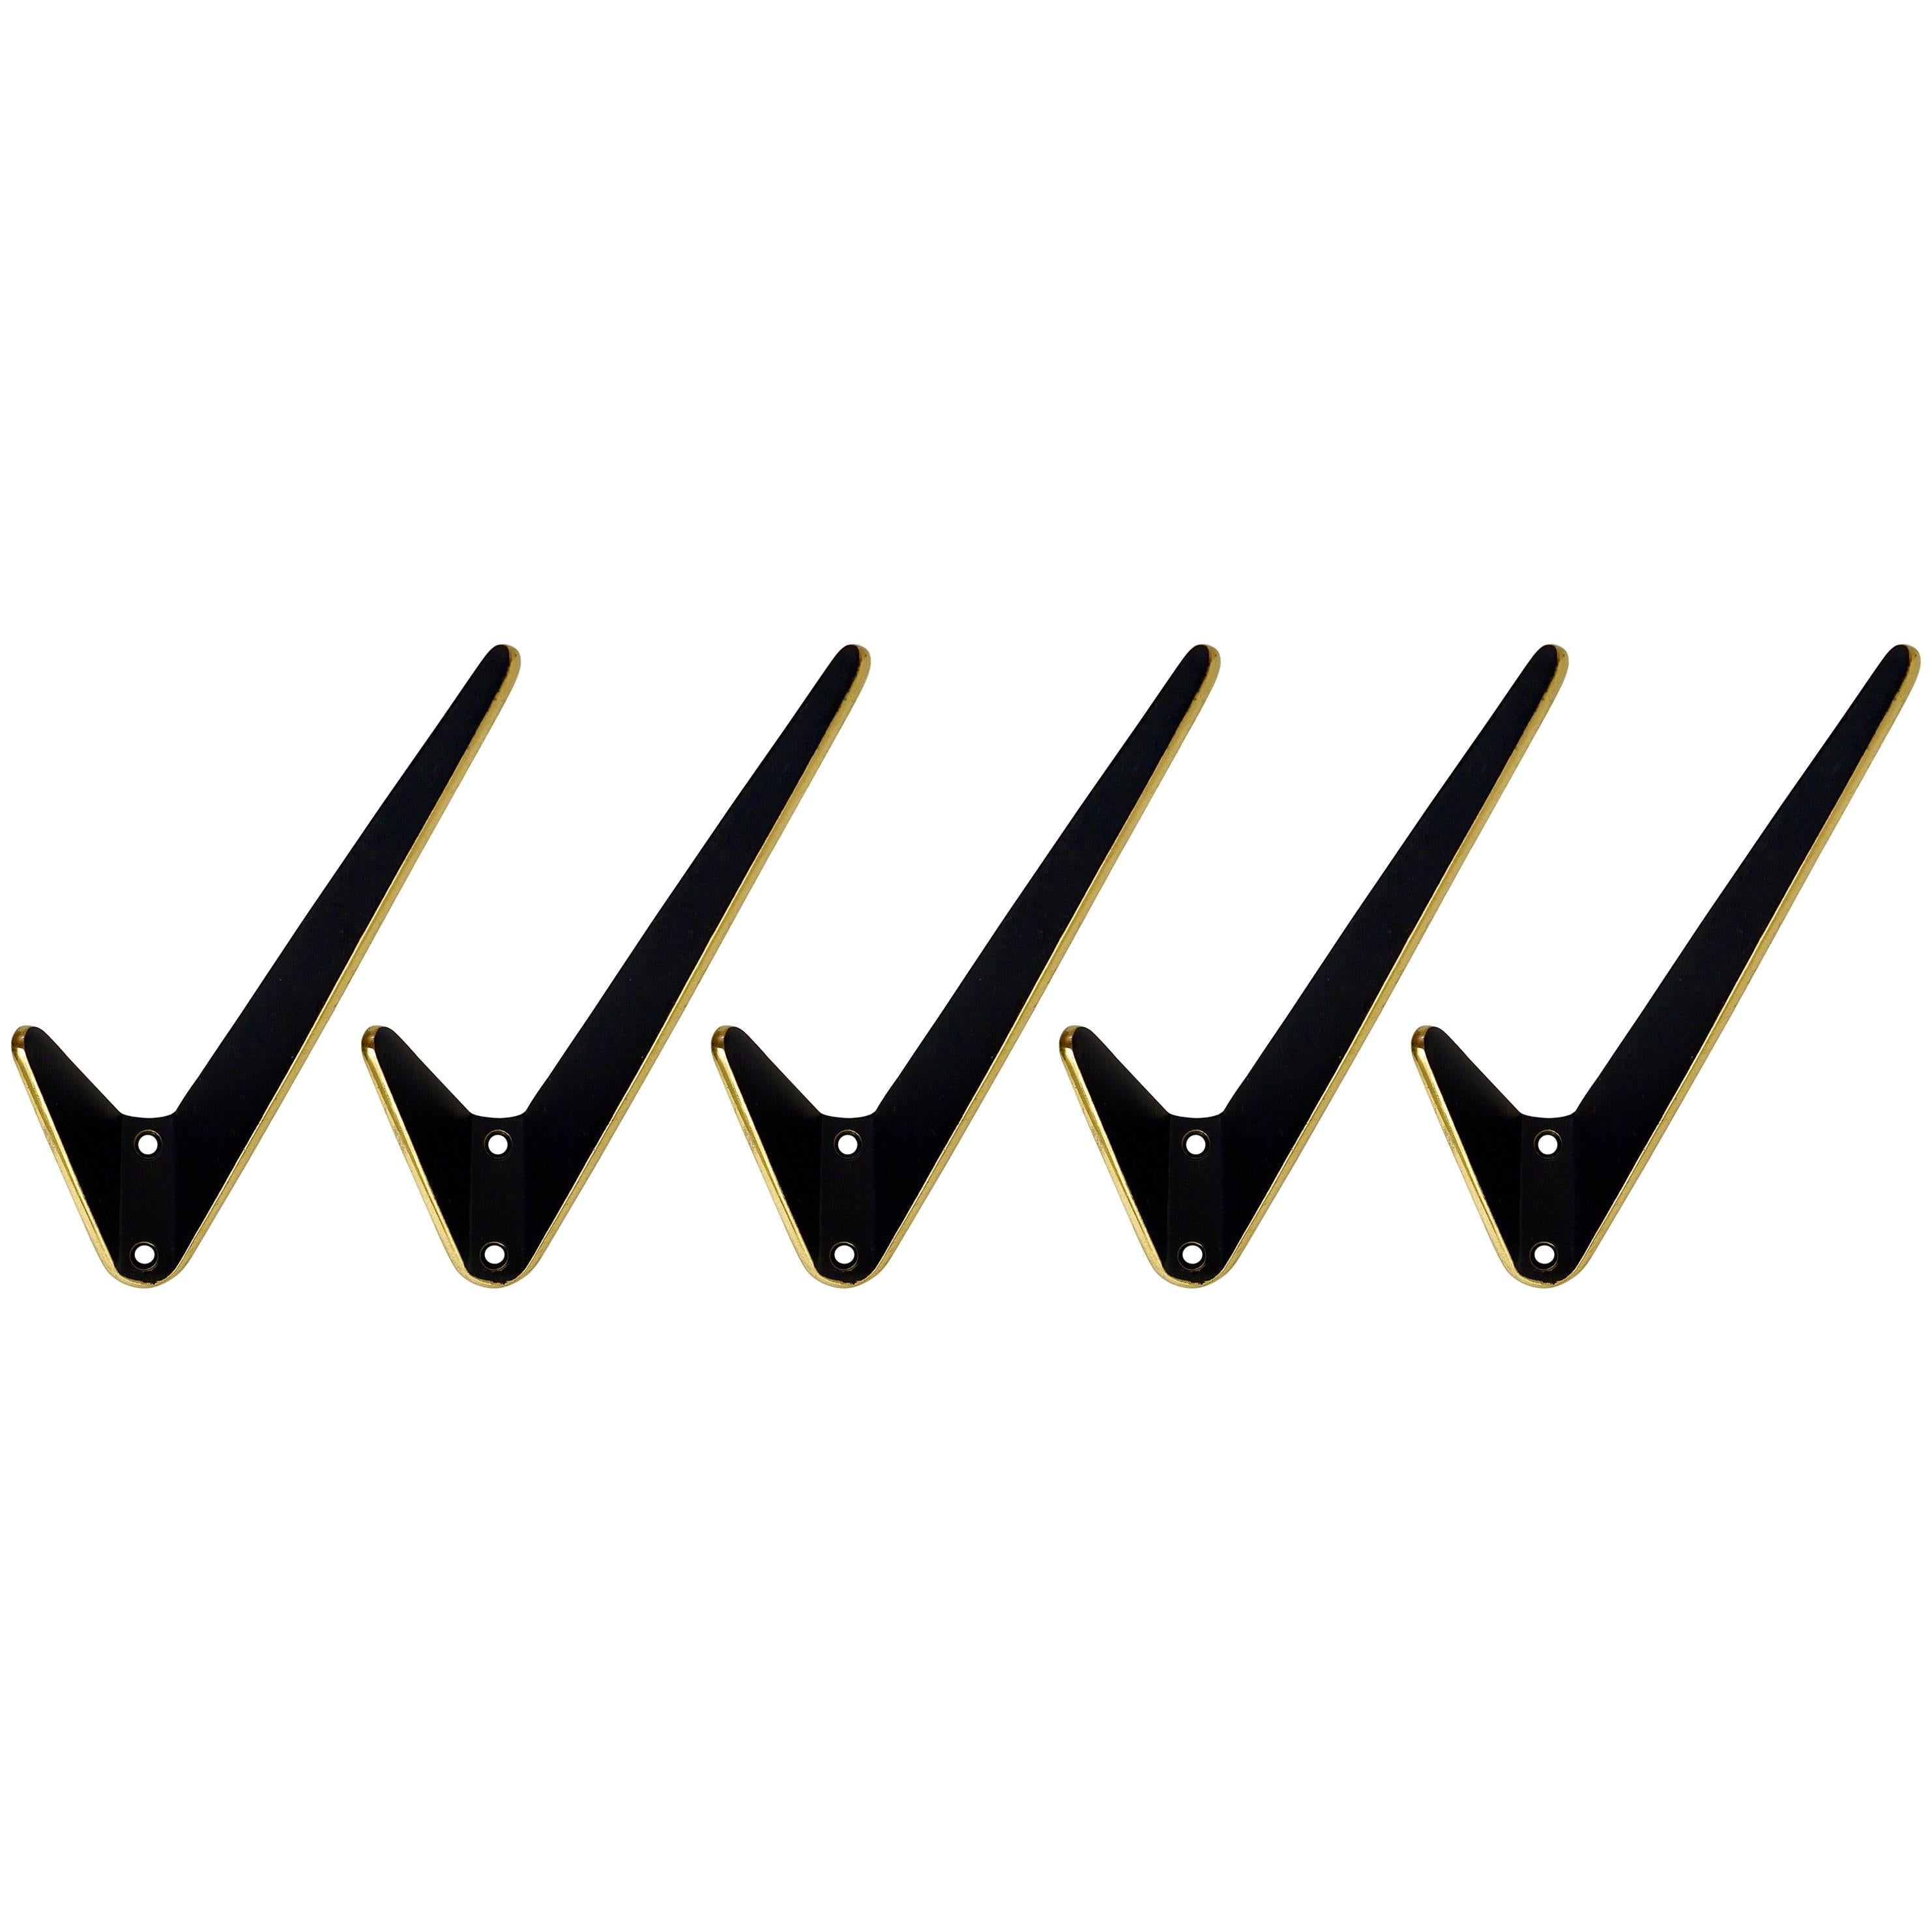 Up to Five Asymmetric Midcentury Brass and Black Wall Hooks, Austria, 1950s